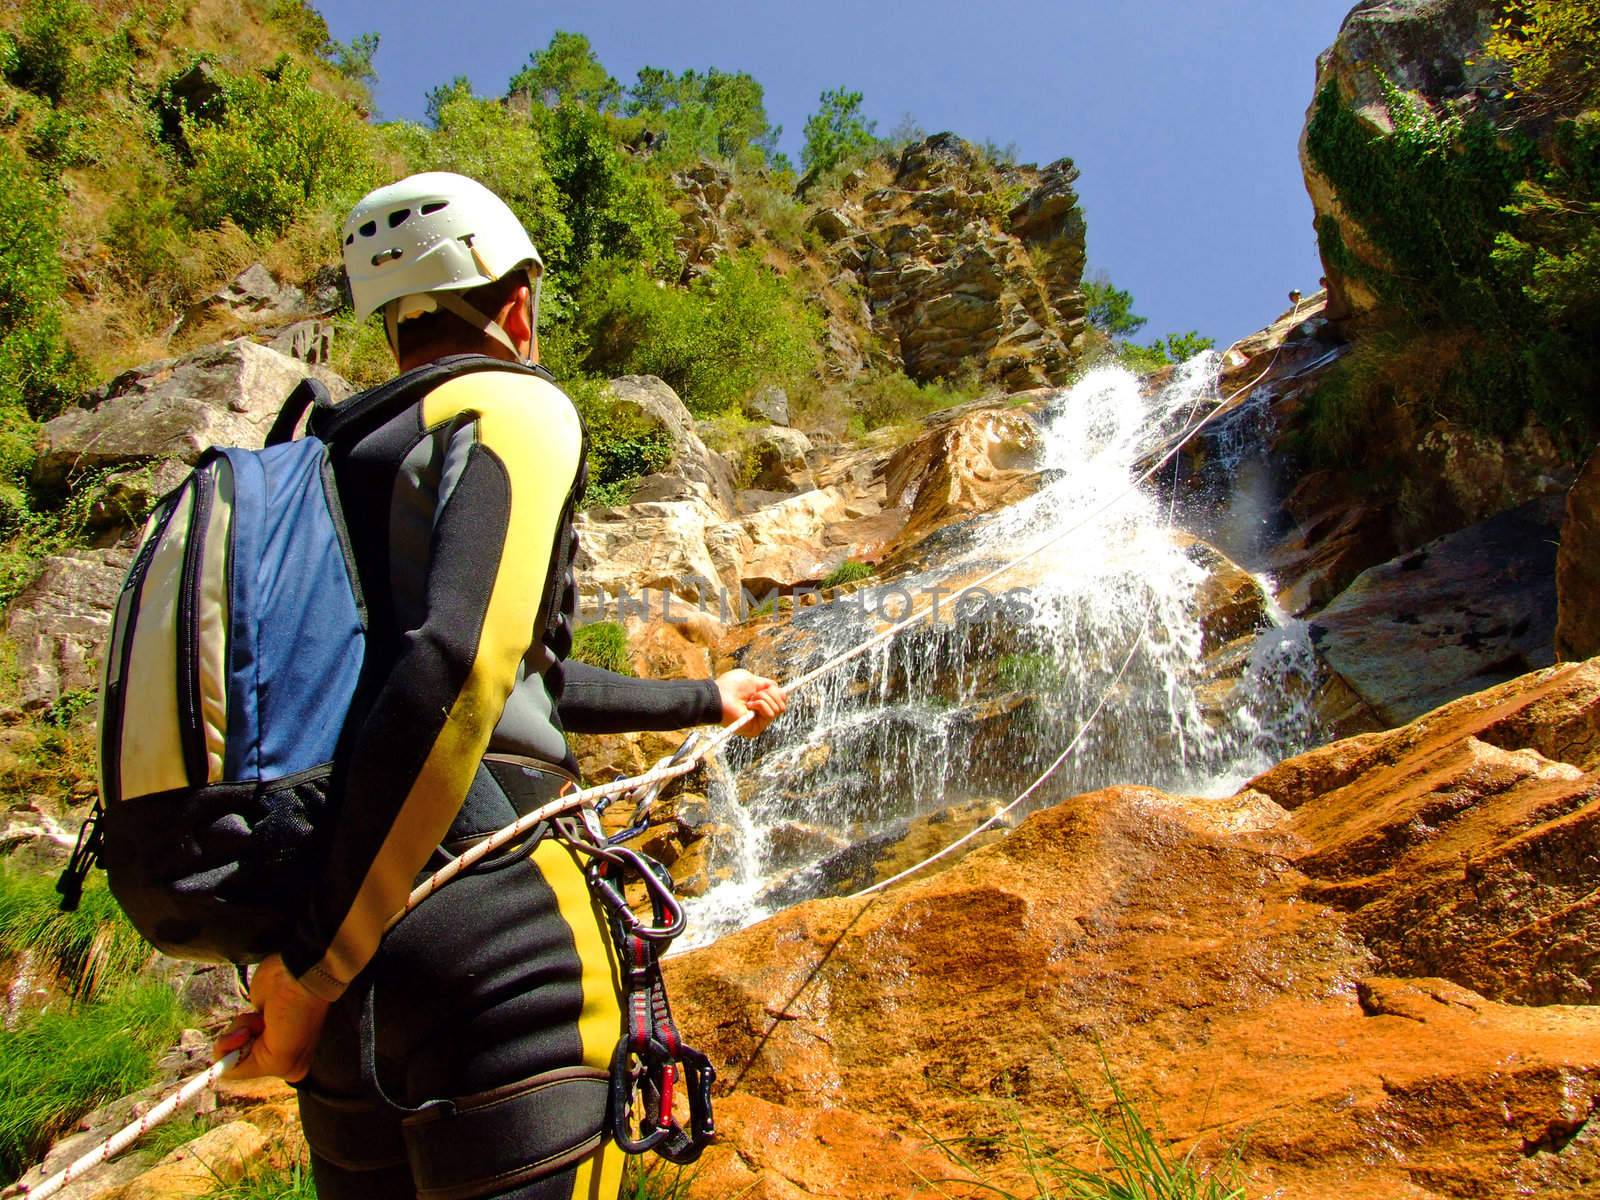 Canyoning in Portugal

